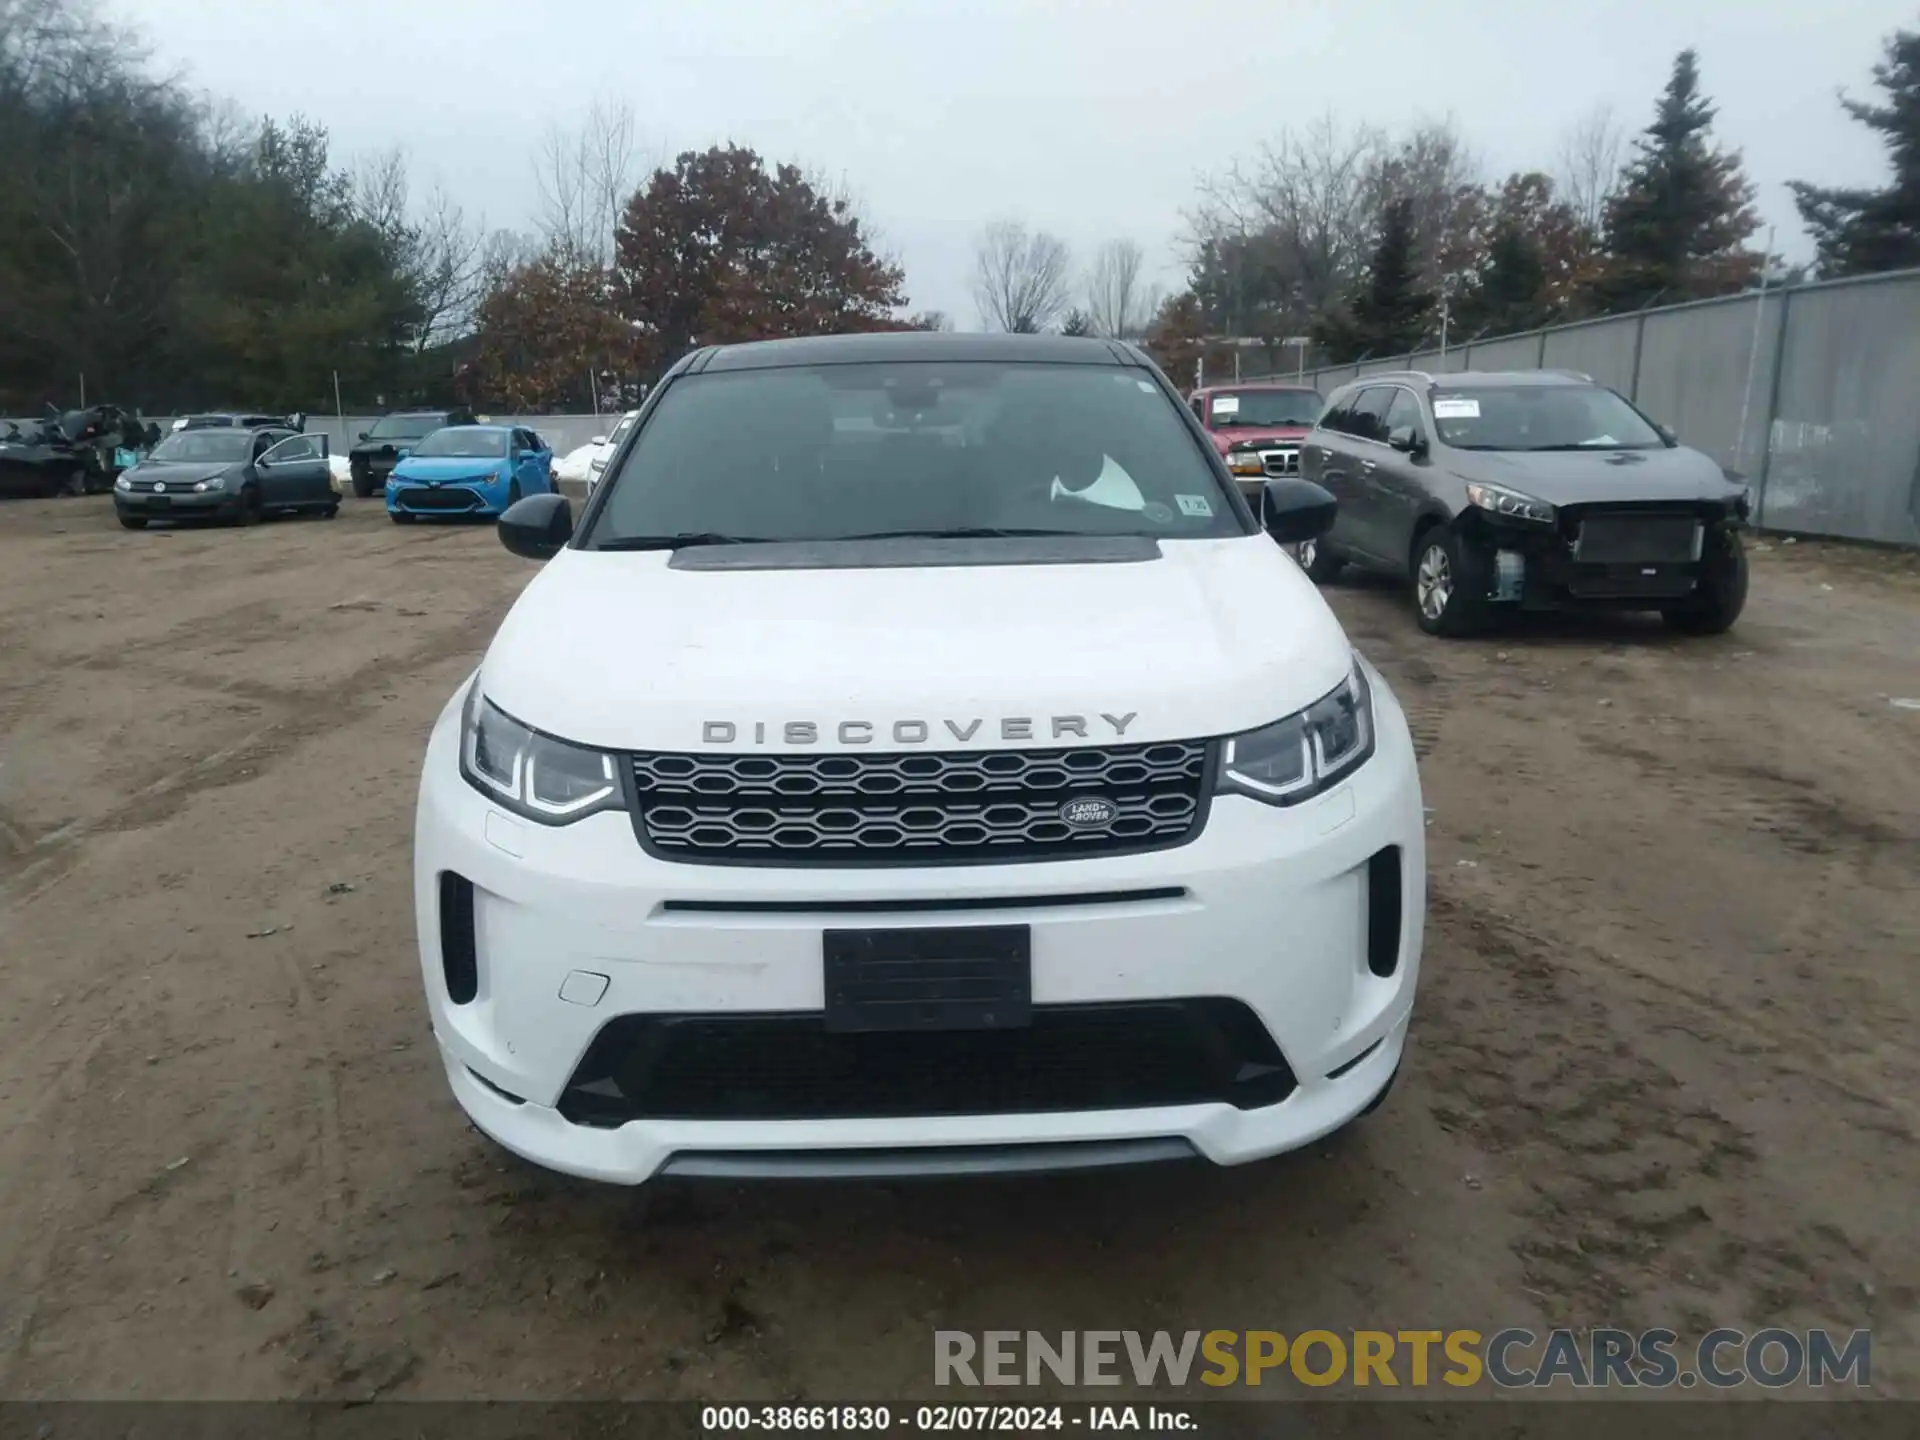 12 Photograph of a damaged car SALCT2FXXLH859485 LAND ROVER DISCOVERY SPORT 2020